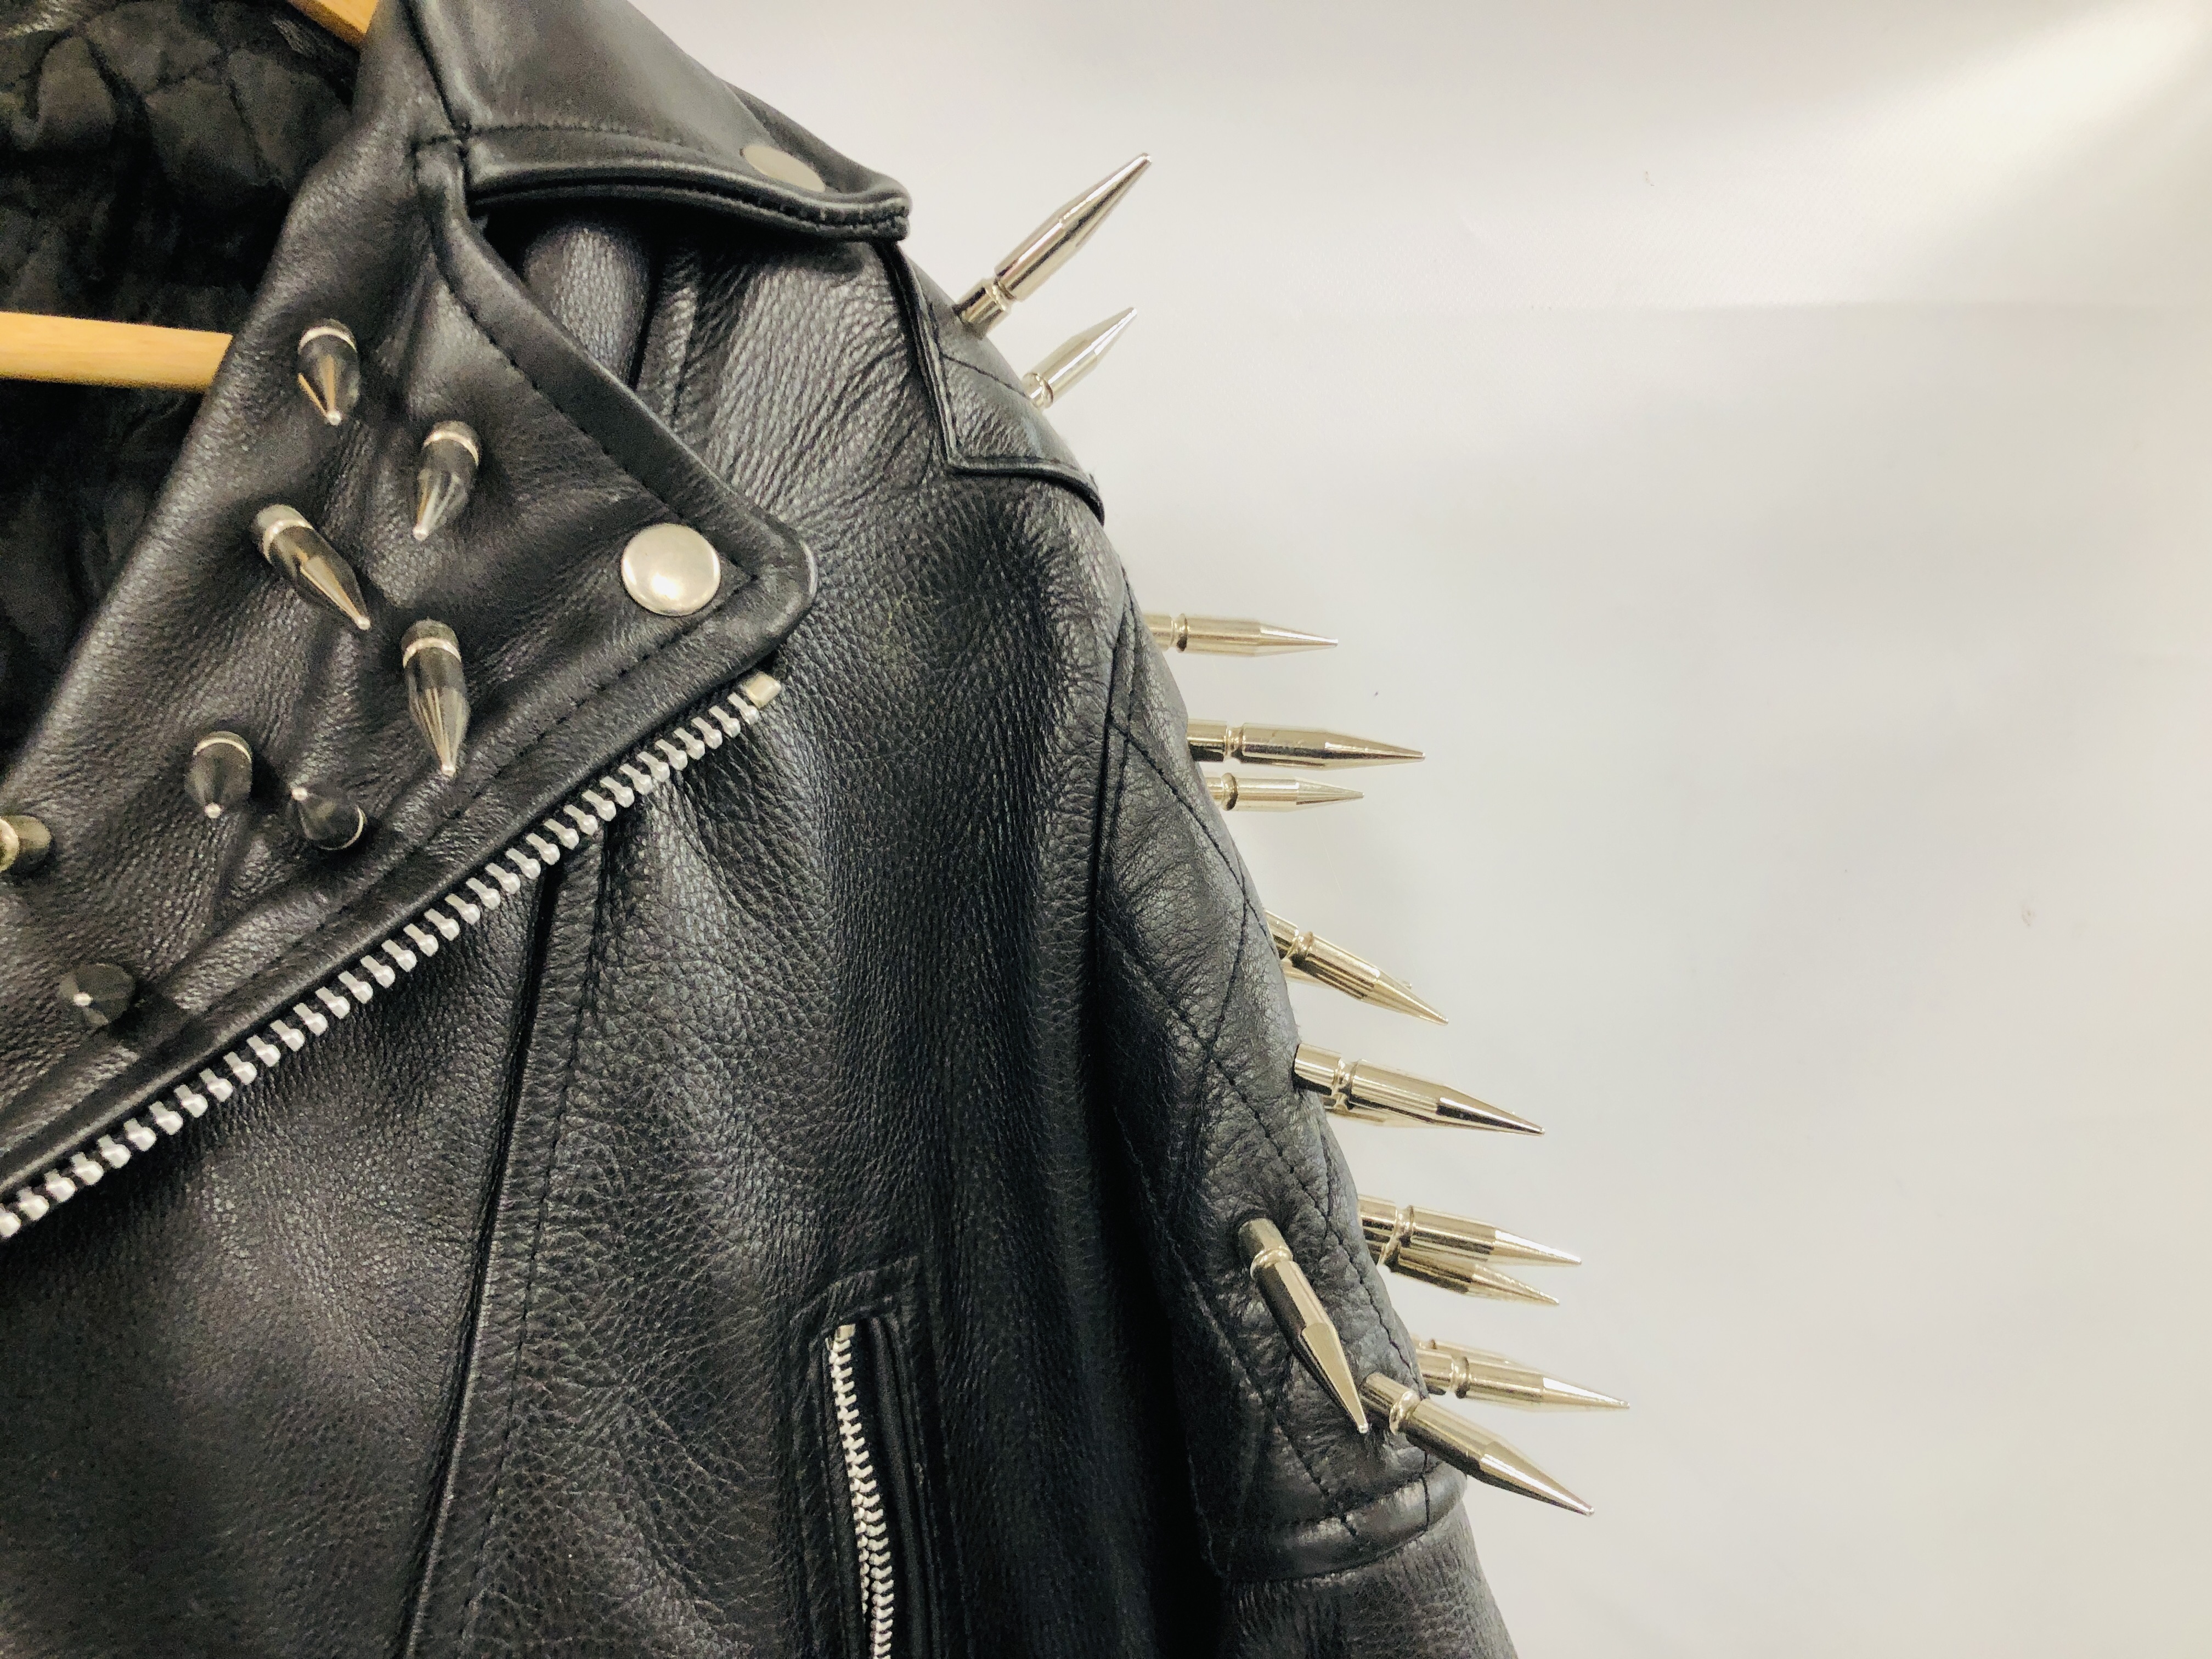 CLASSIC OSX LEATHER JACKET WITH STUD DETAIL SIZE 40 - Image 4 of 5